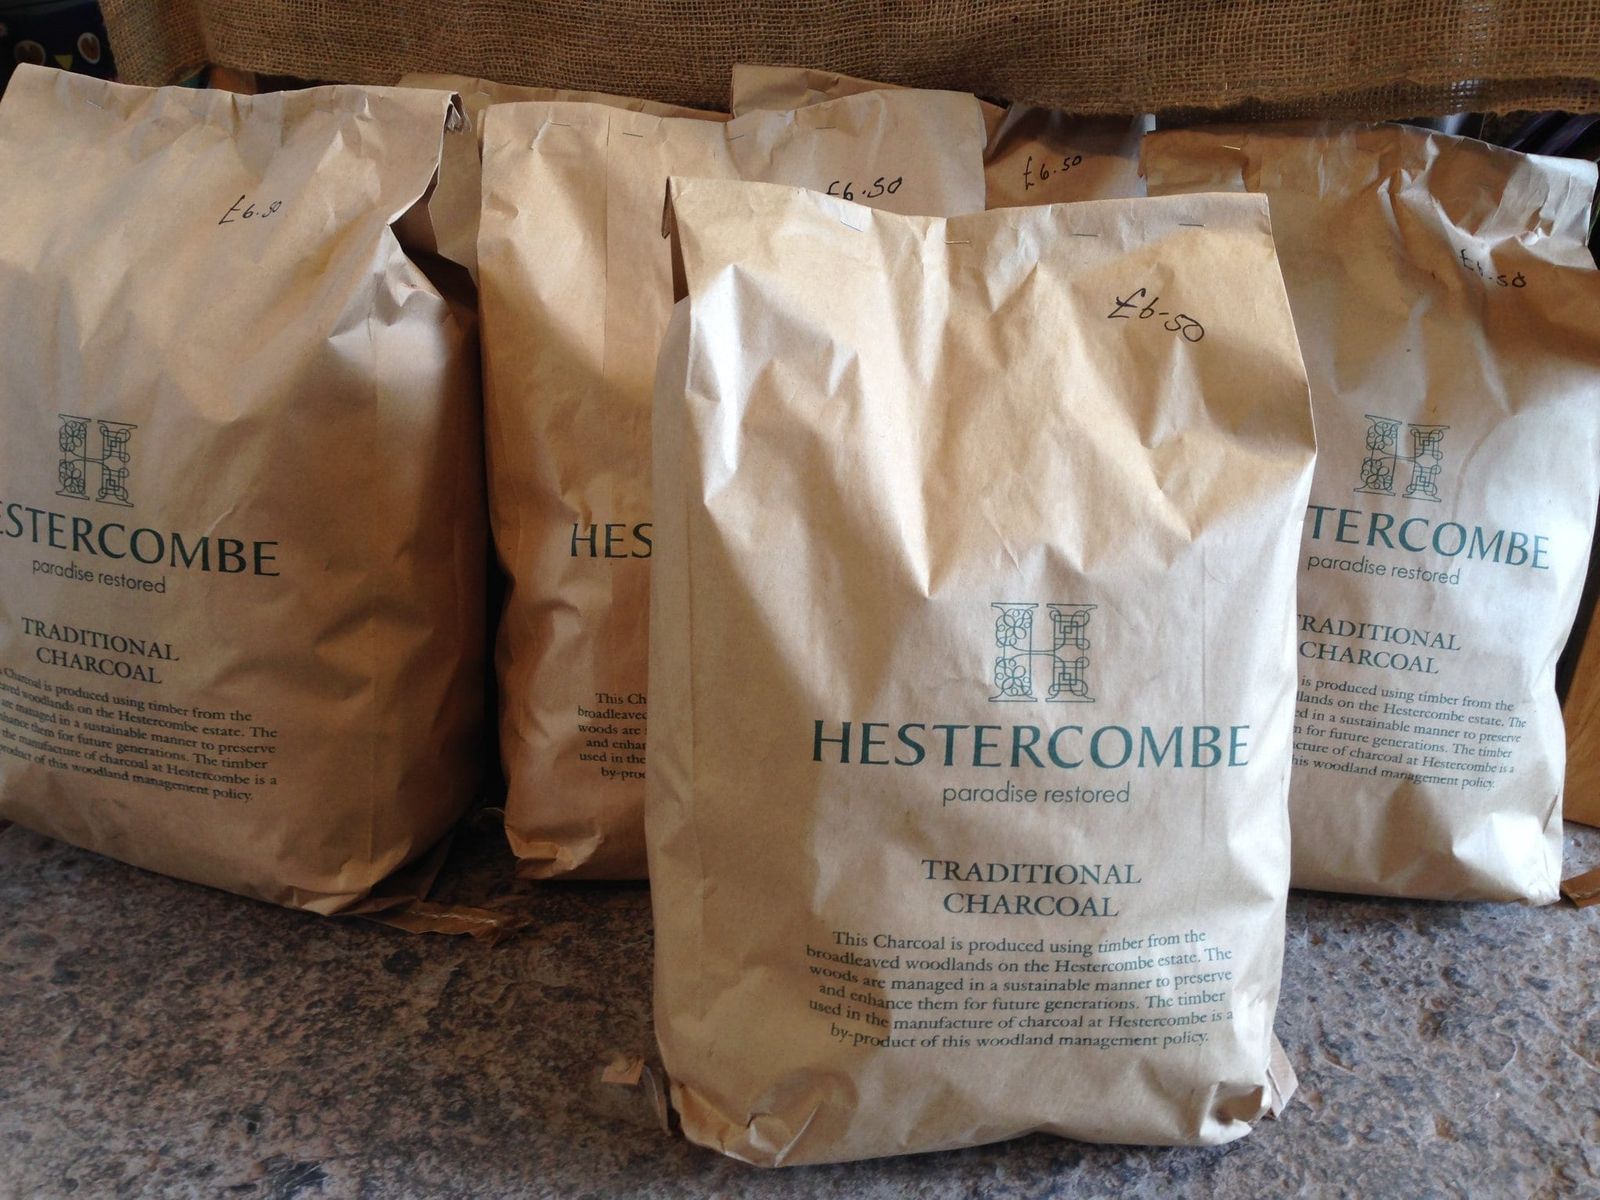 Find out how we make our own charcoal on the Hestercombe estate, as we have for over 250 years, and how it can help you, us and the environment too.